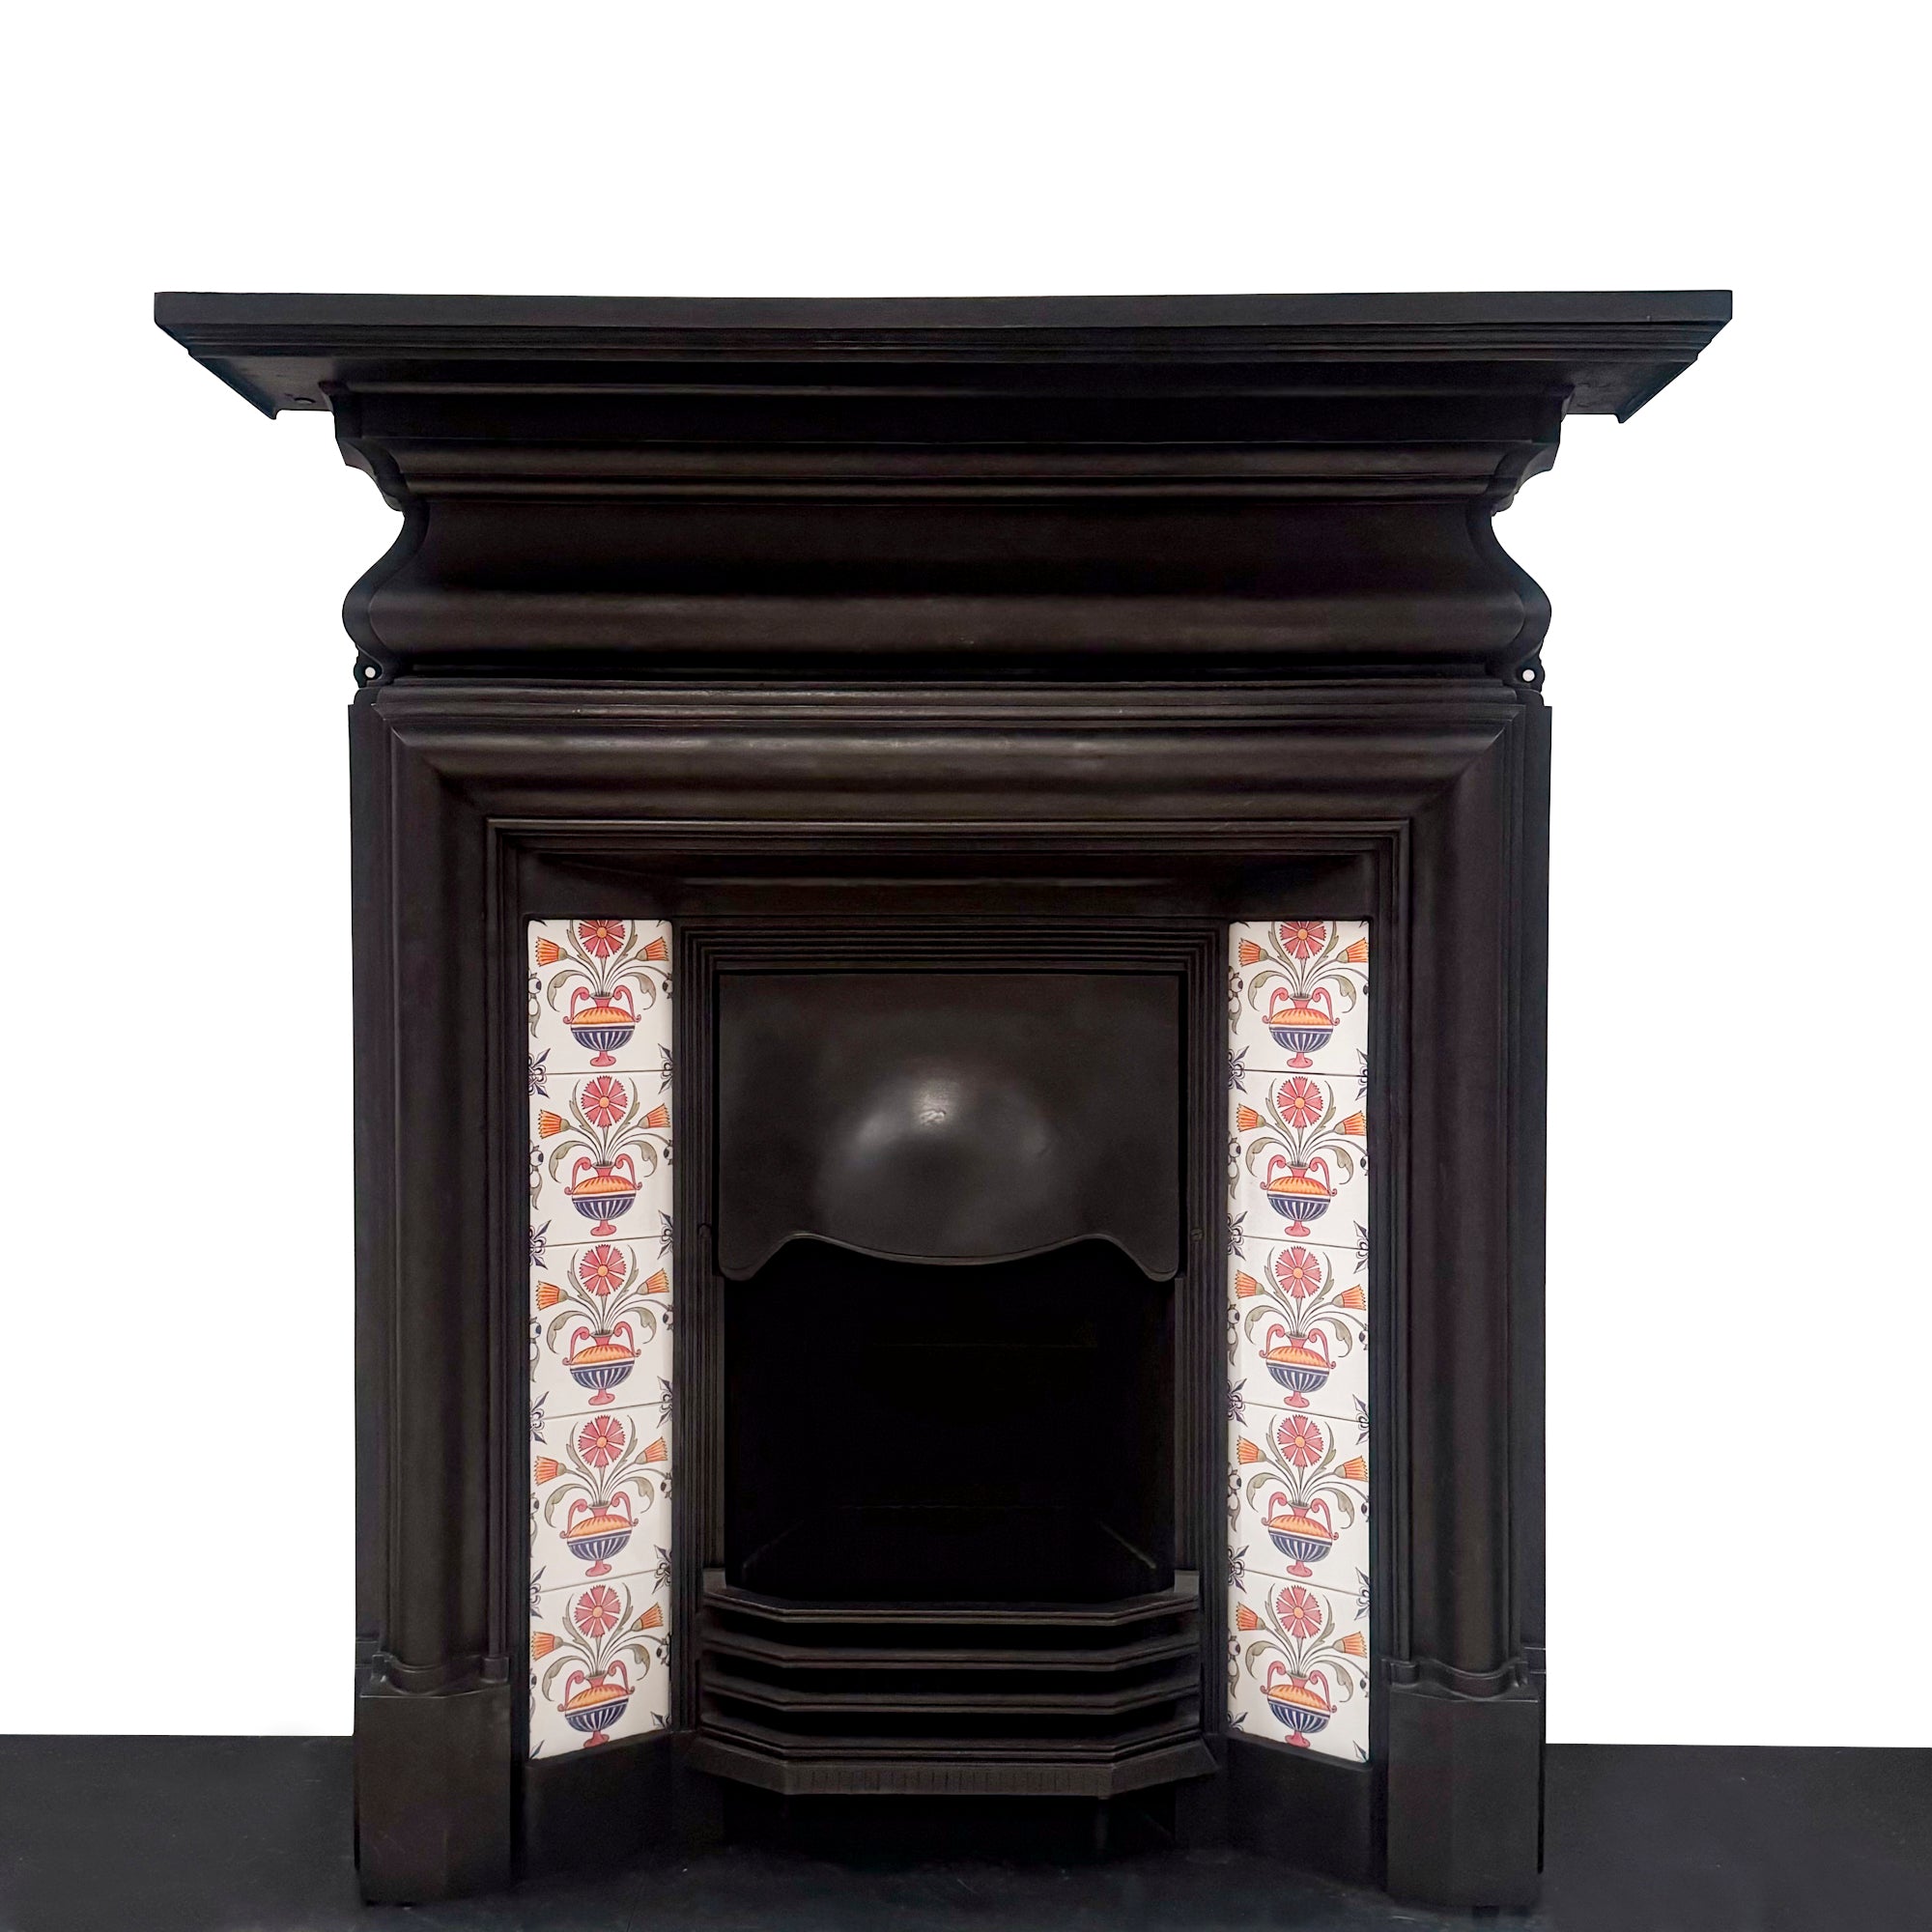 Antique Edwardian Tiled Combination Fireplace | The Architectural Forum